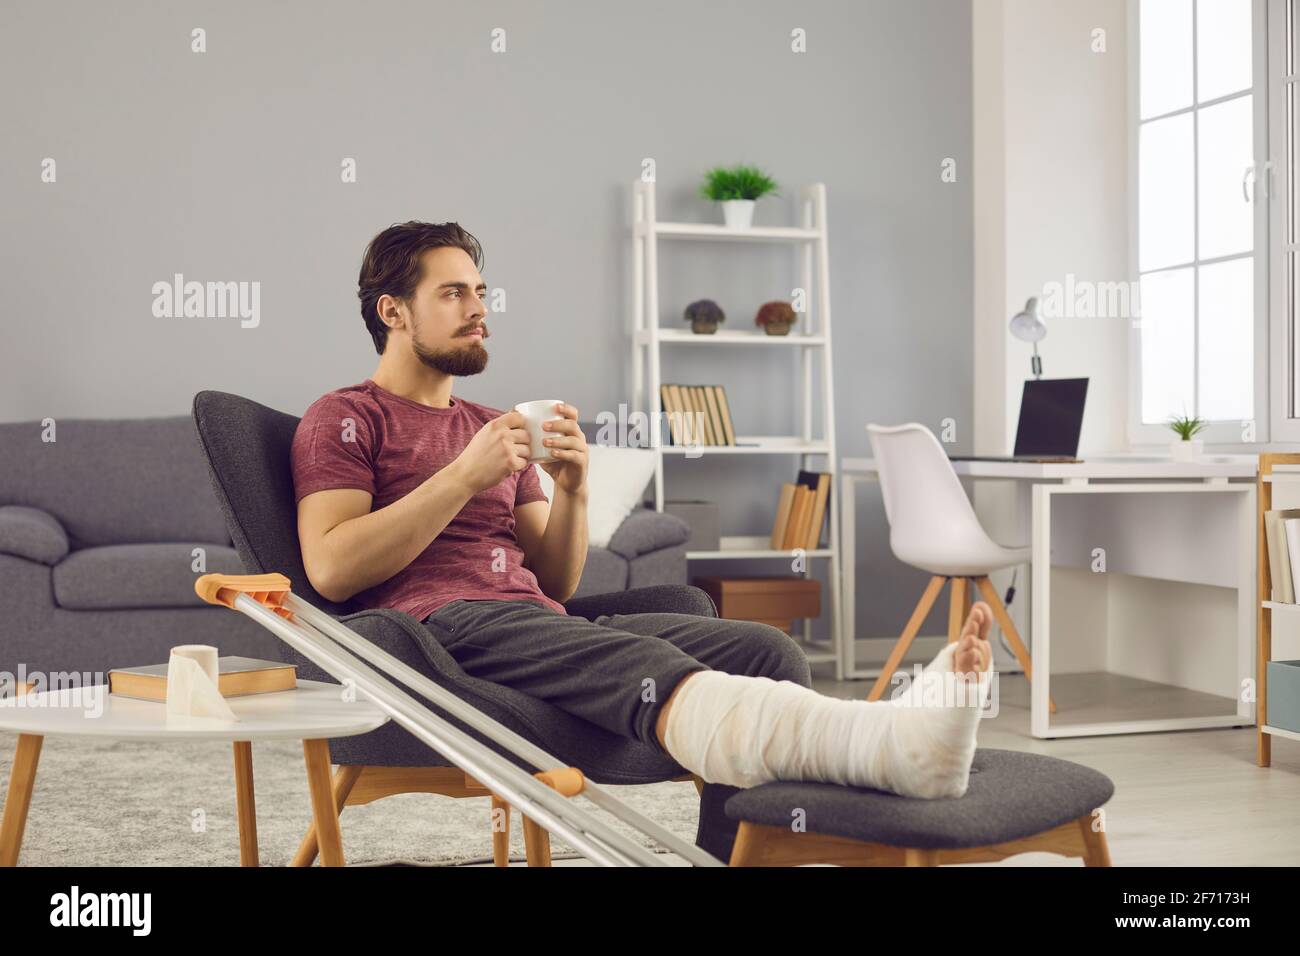 Young man with leg bone fracture feeling sad and bored while staying alone at home Stock Photo